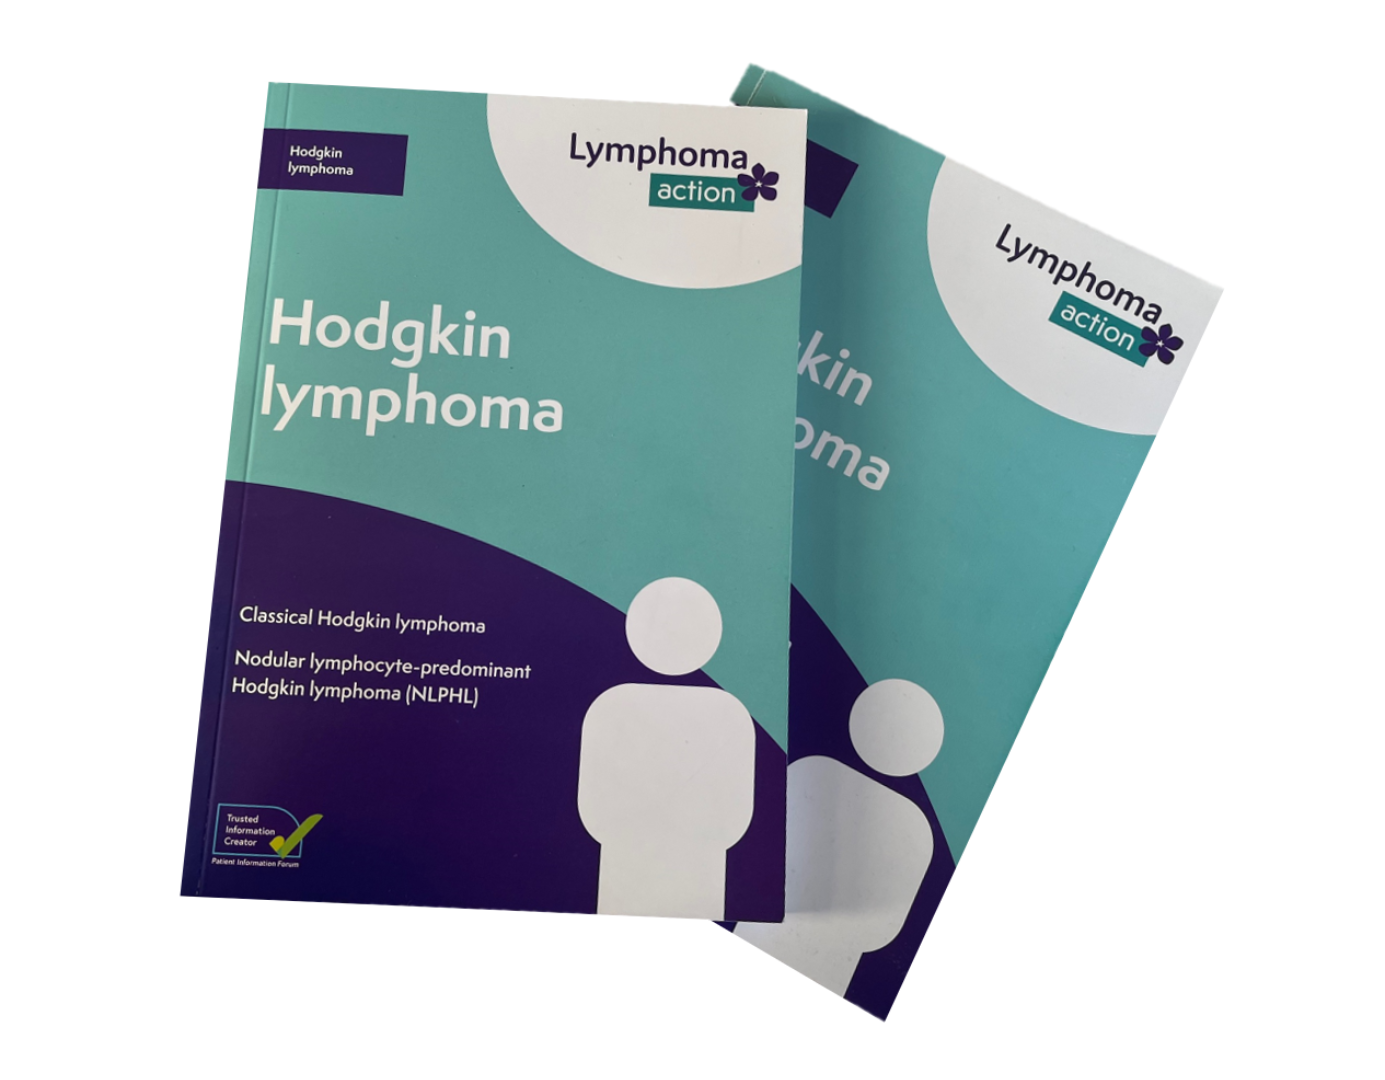 Front cover of the updated Hodgkin lymphoma book